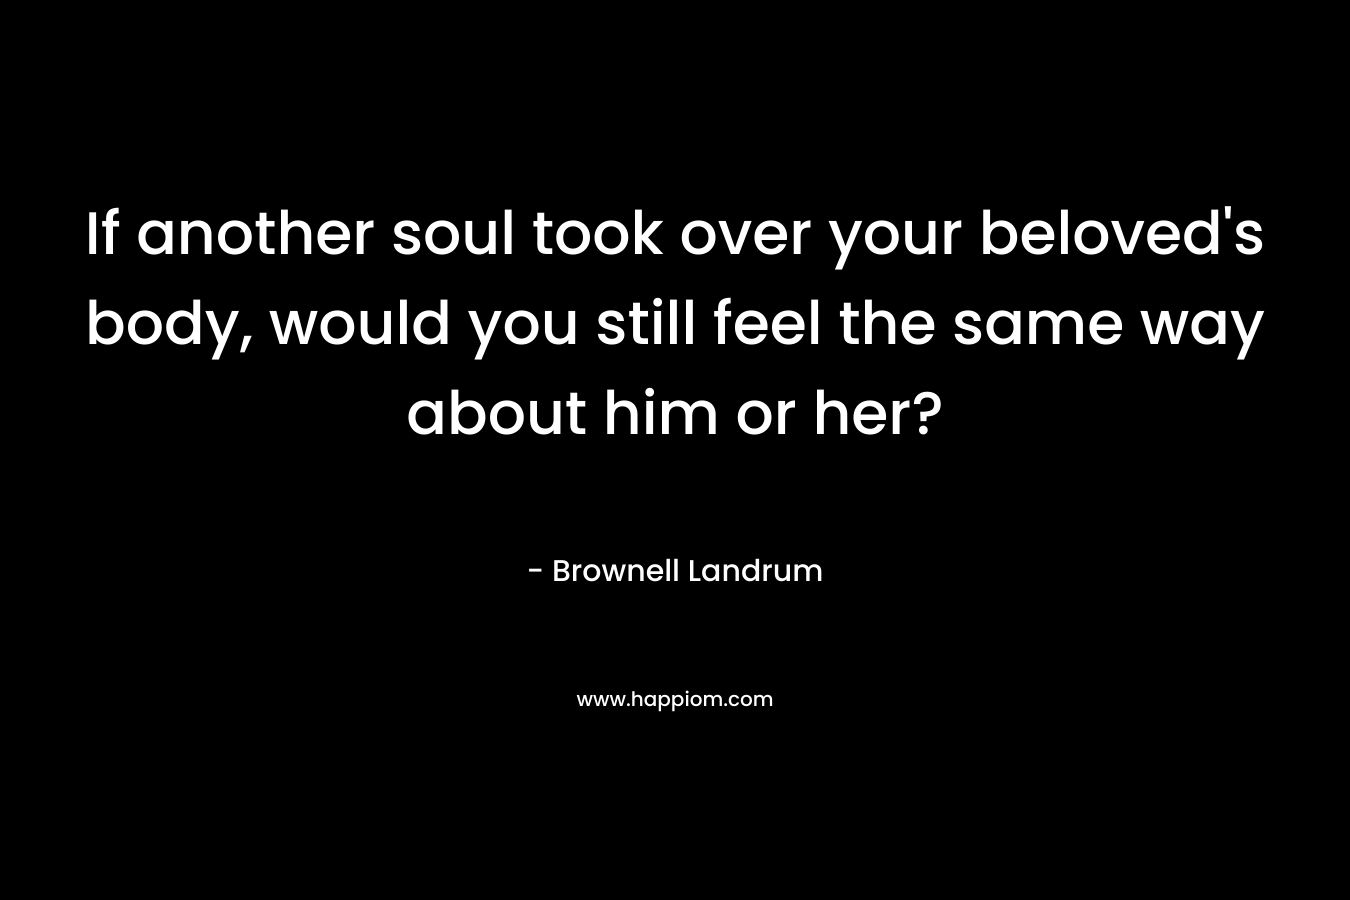 If another soul took over your beloved's body, would you still feel the same way about him or her?